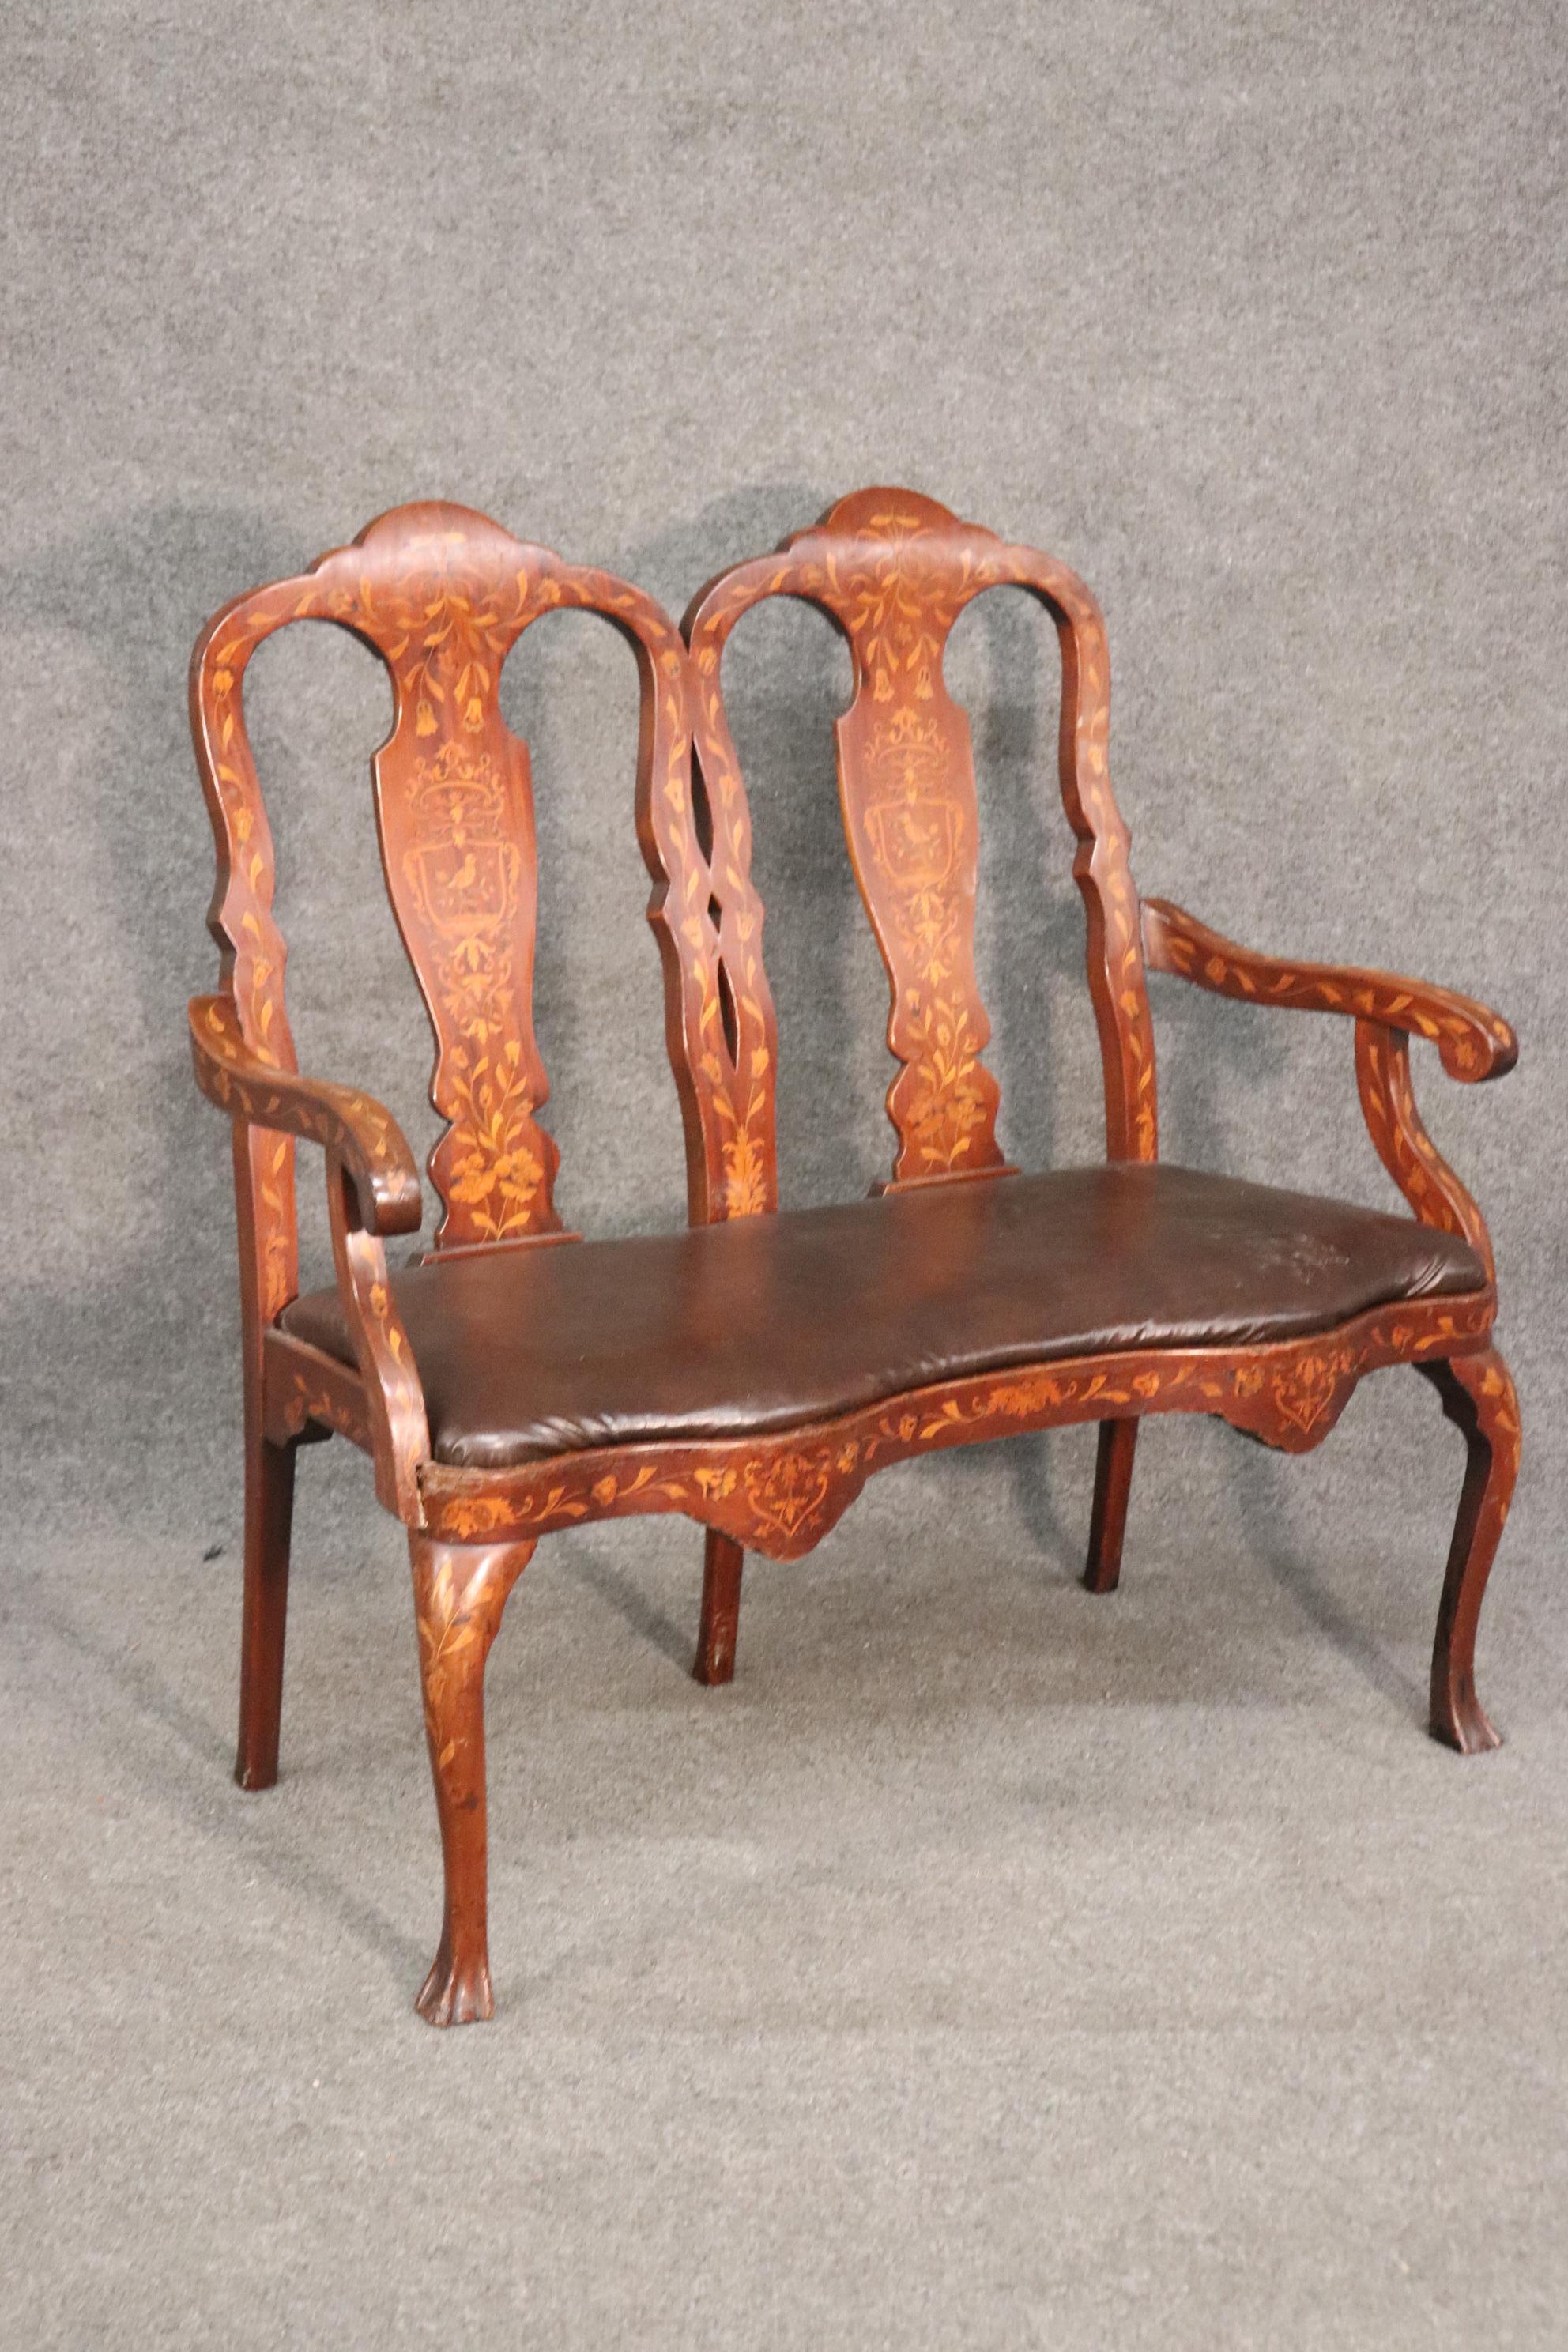 Dutch Colonial Leather Upholstered Dutch Marquetry Inlaid Window Bench Circa 1900 For Sale